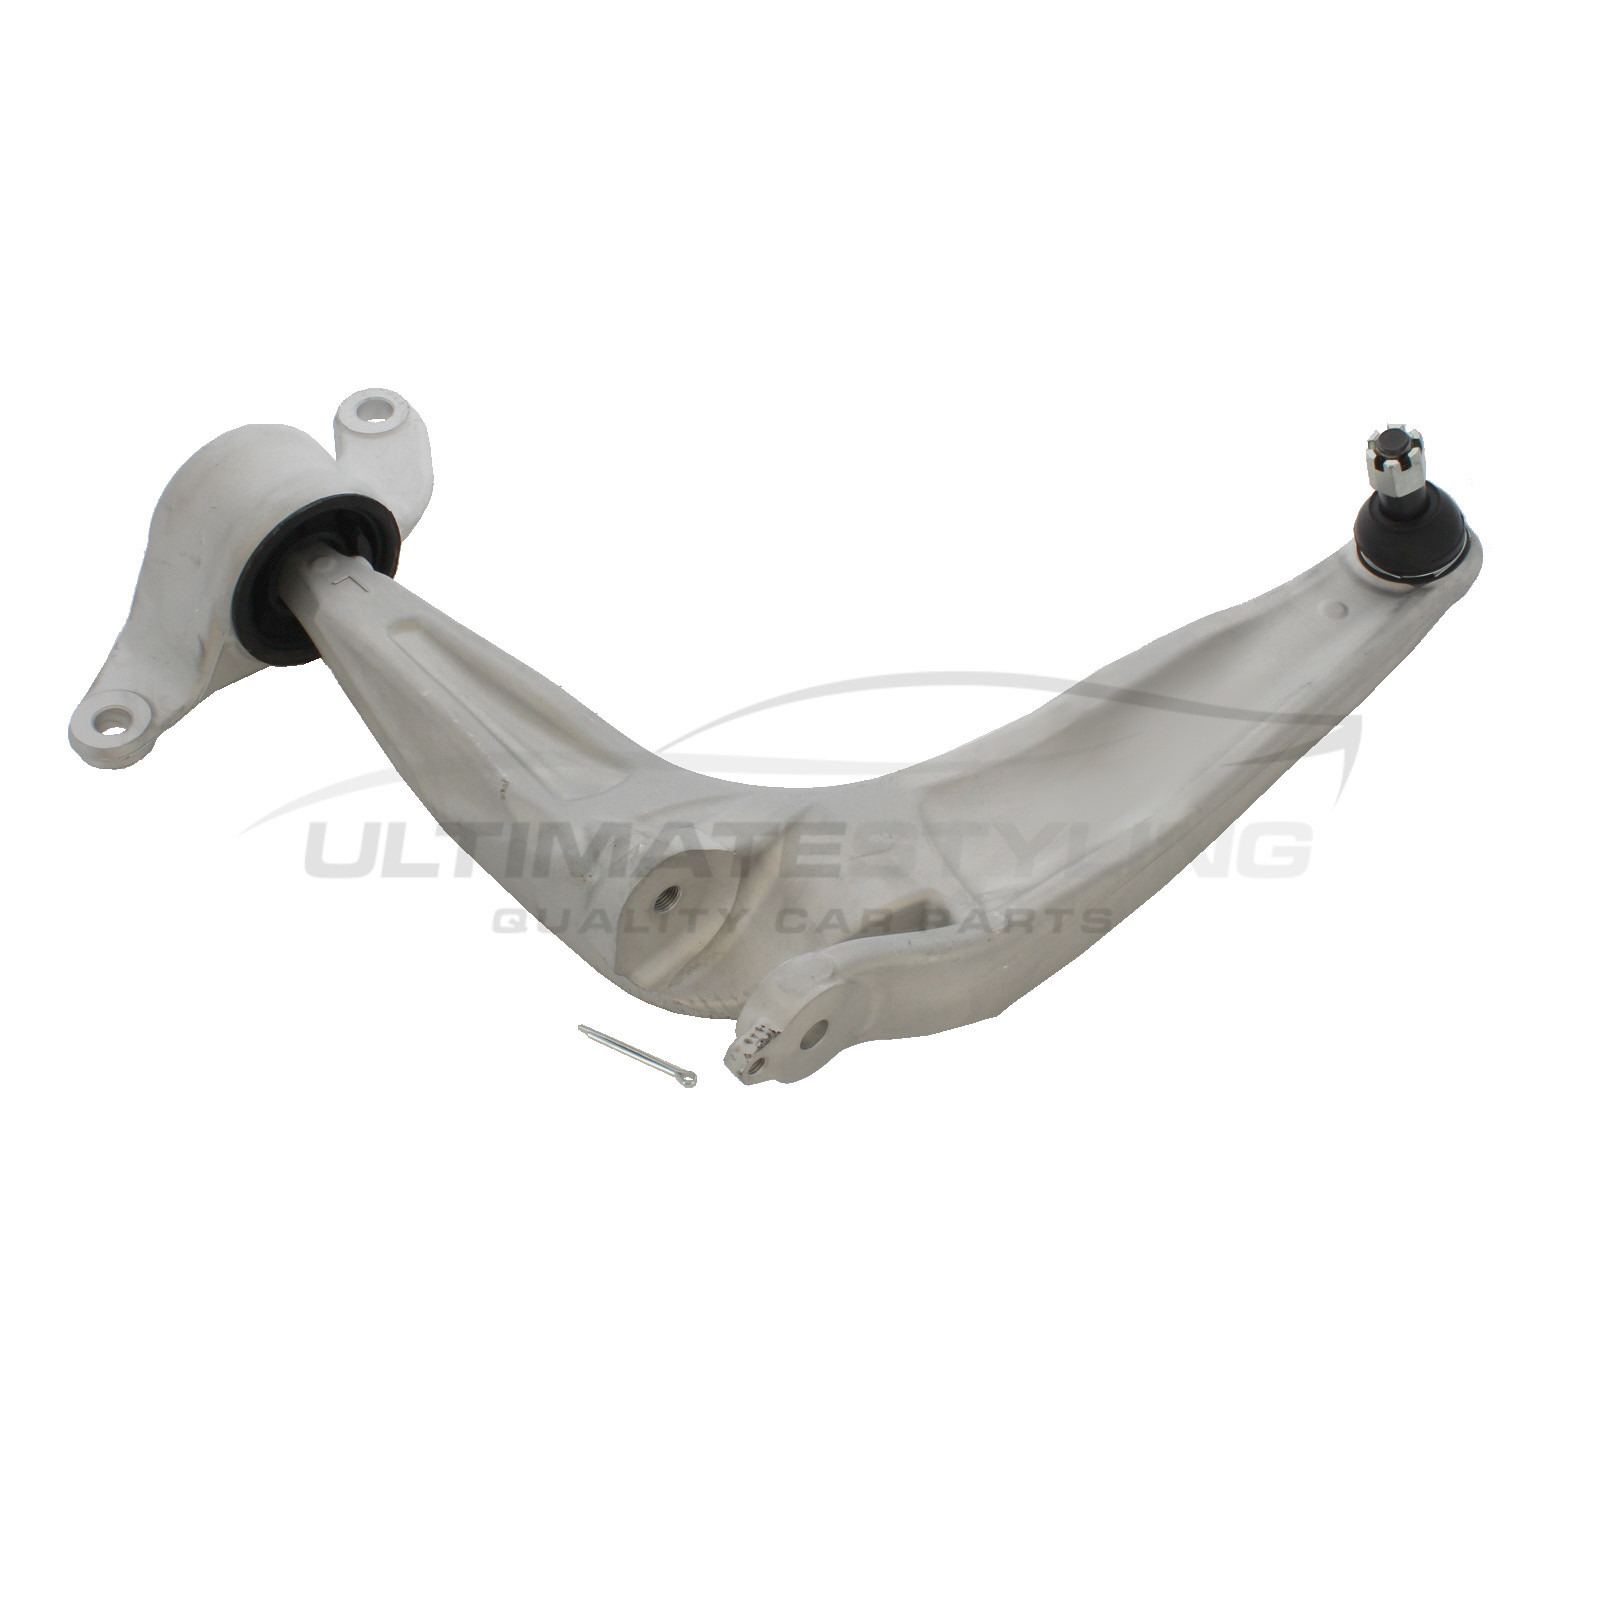 Honda Civic 2005-2012 Front Lower Suspension Arm (Alloy) Including Ball Joint and Rear Bush Passenger Side (LH)